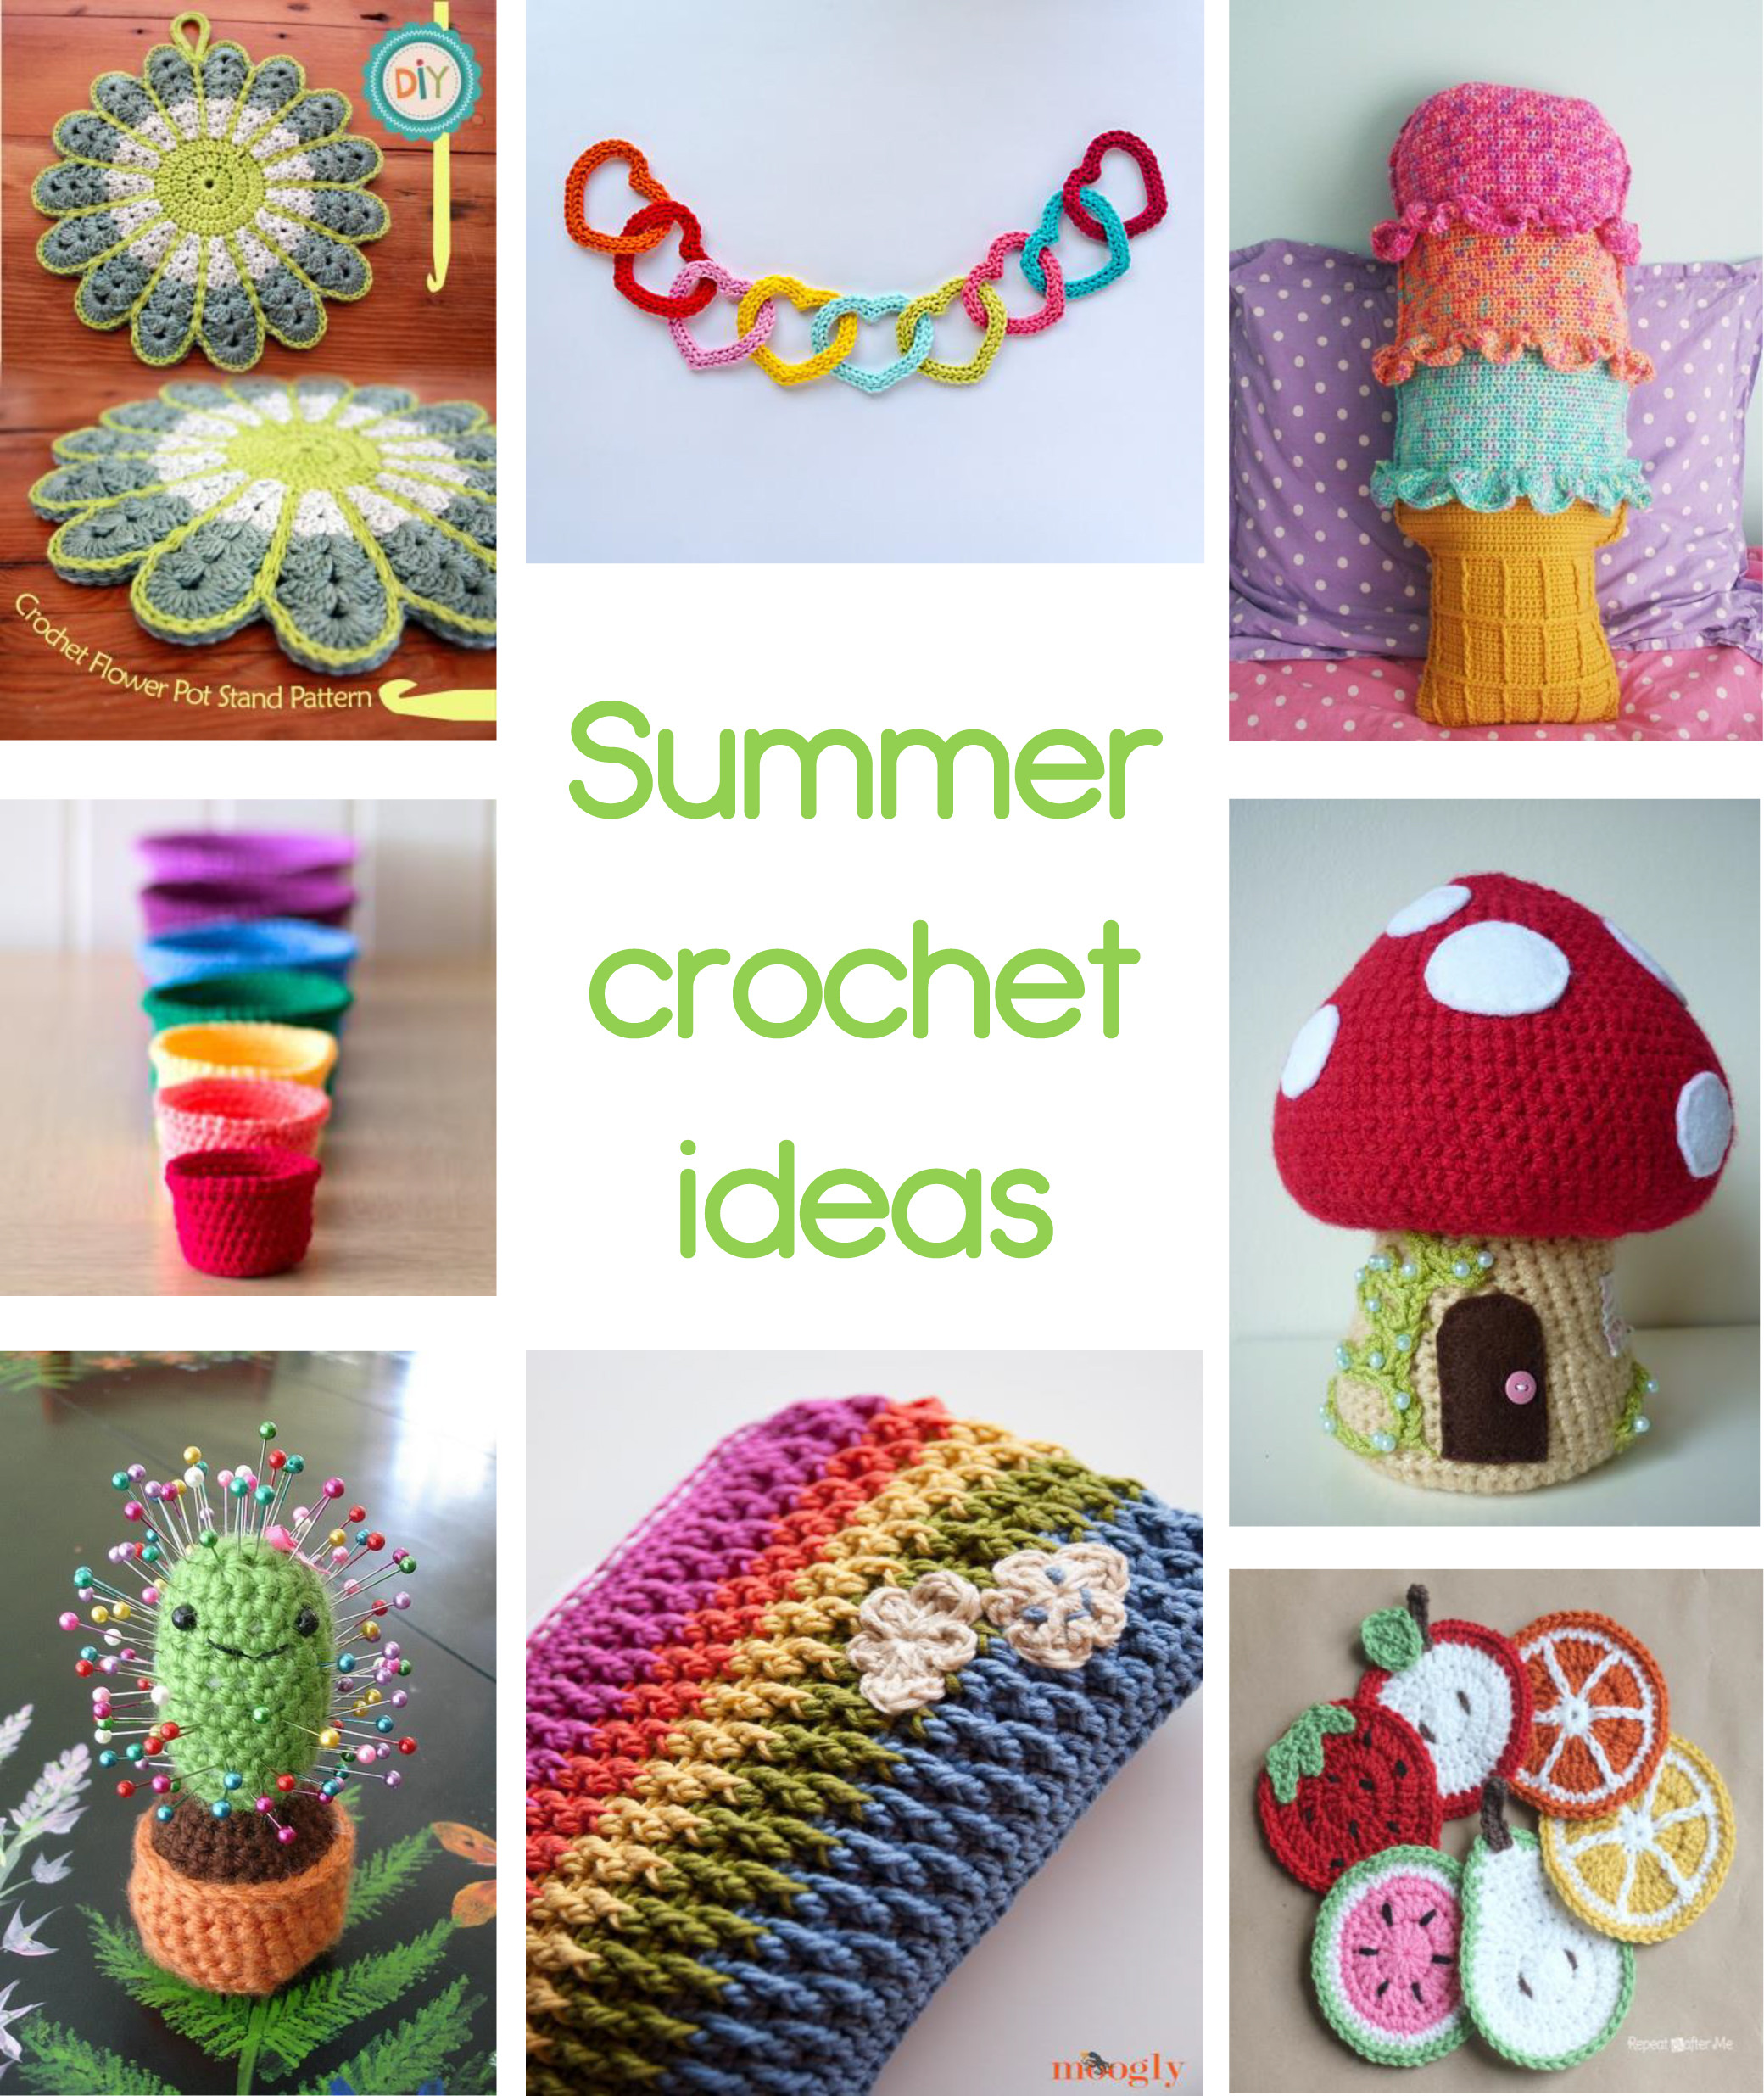 Crocheting Ideas For Summer
 Make it Monday summer crochet – The Creative Pixie